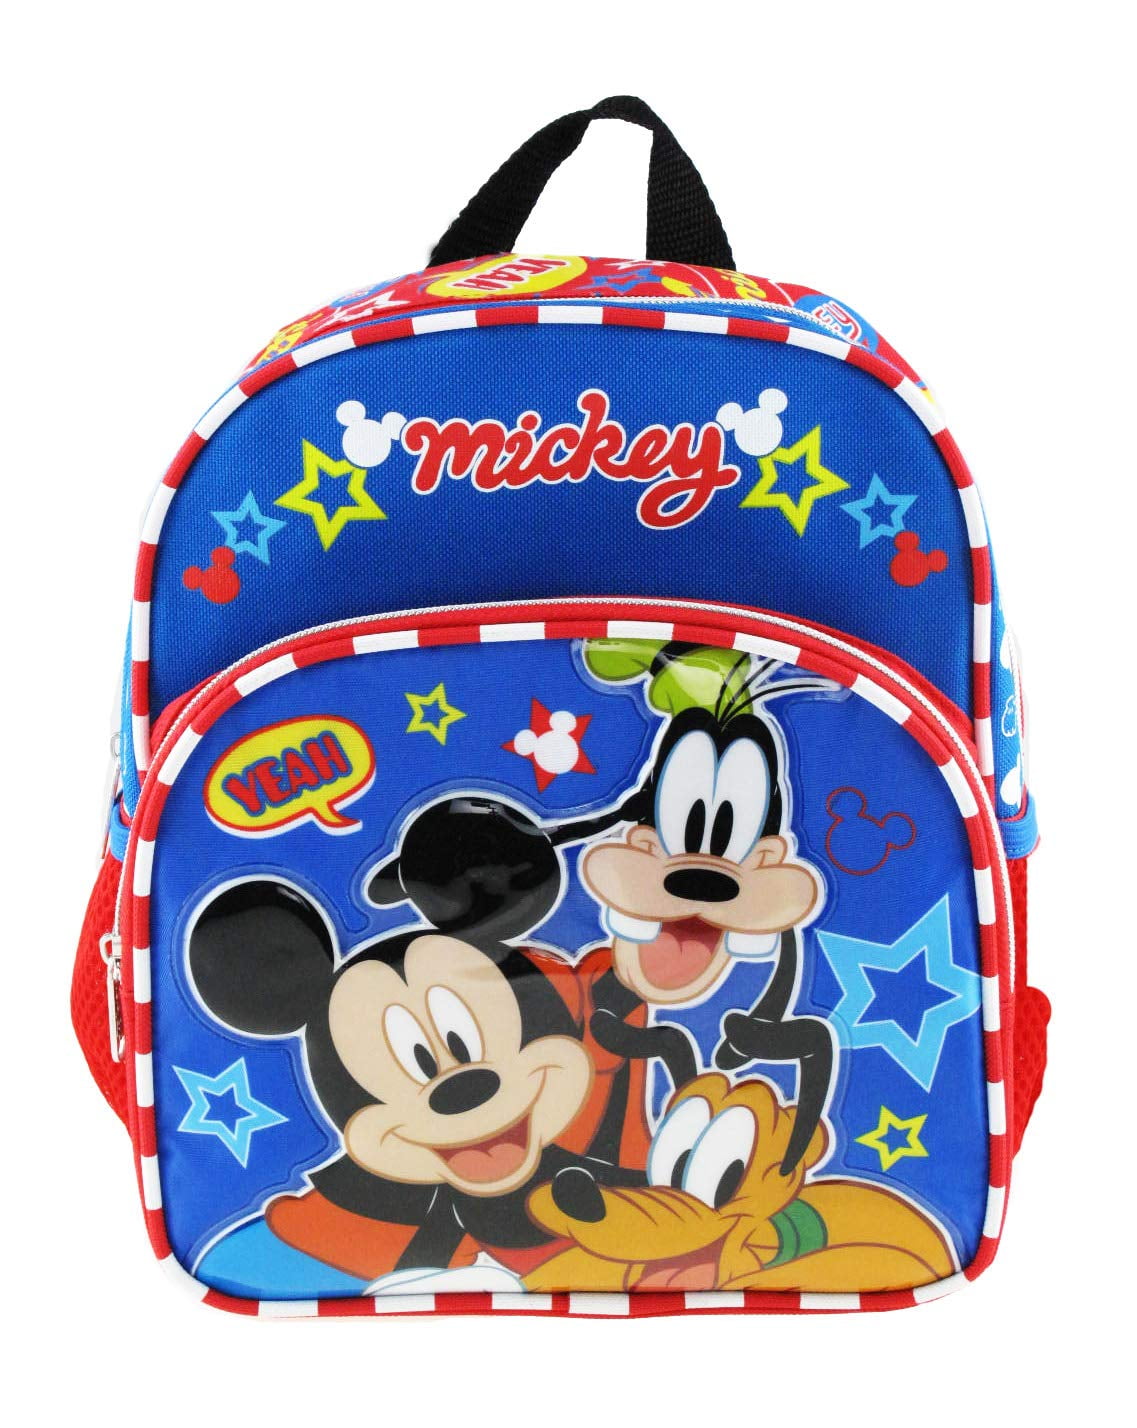 Disney Minnie Mouse 12" Toddler School Backpack Girls Canvas Book Bag